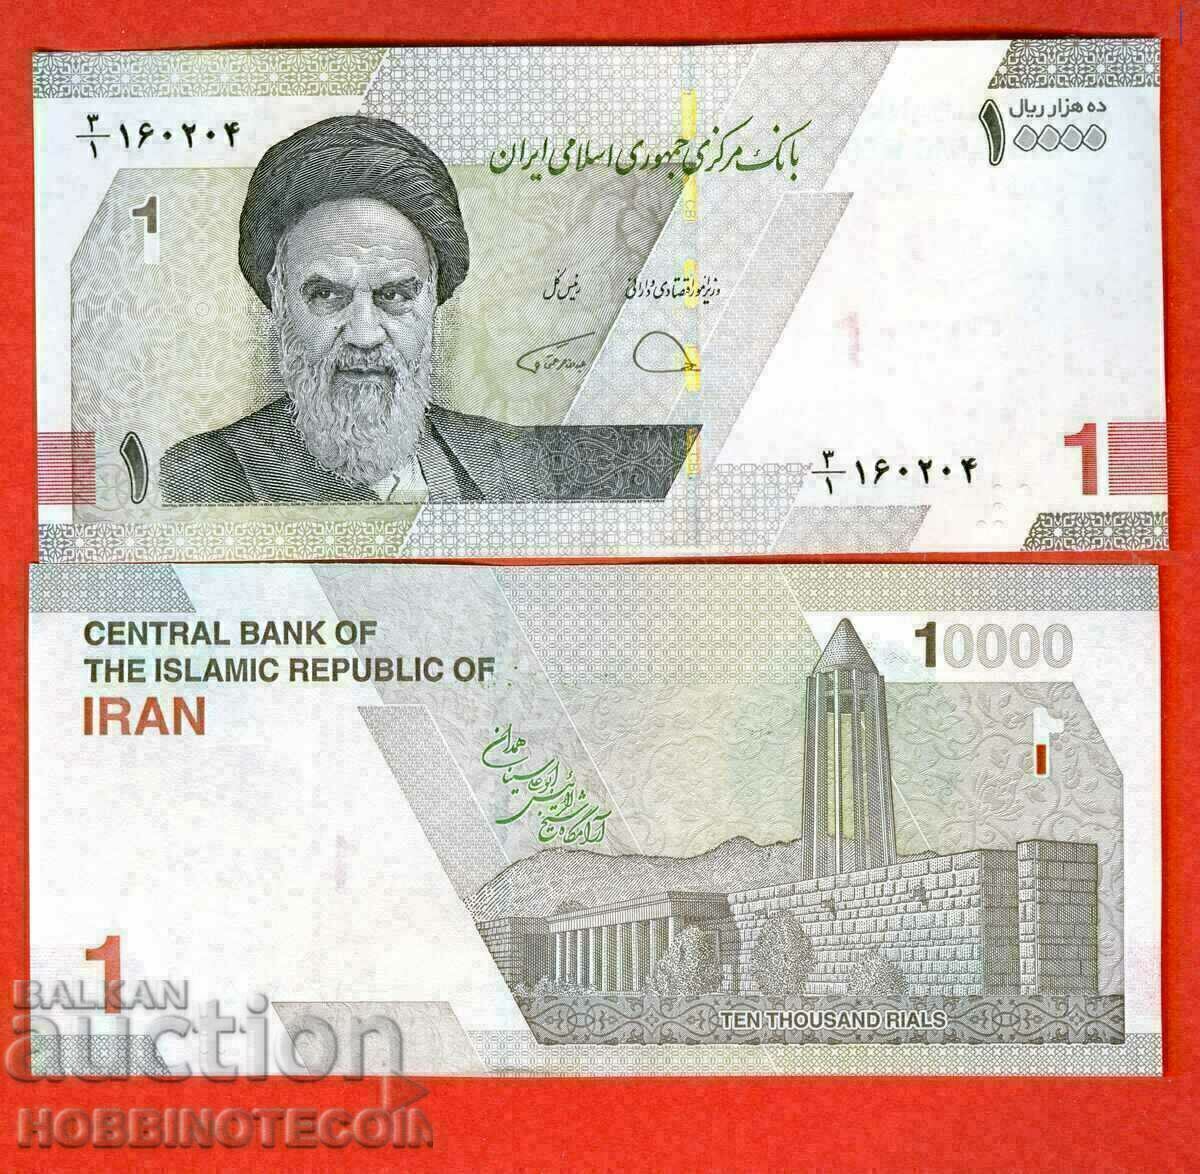 IRAN IRAN 10 000 10000 - 1 Rial issue issue 2022 NEW UNC